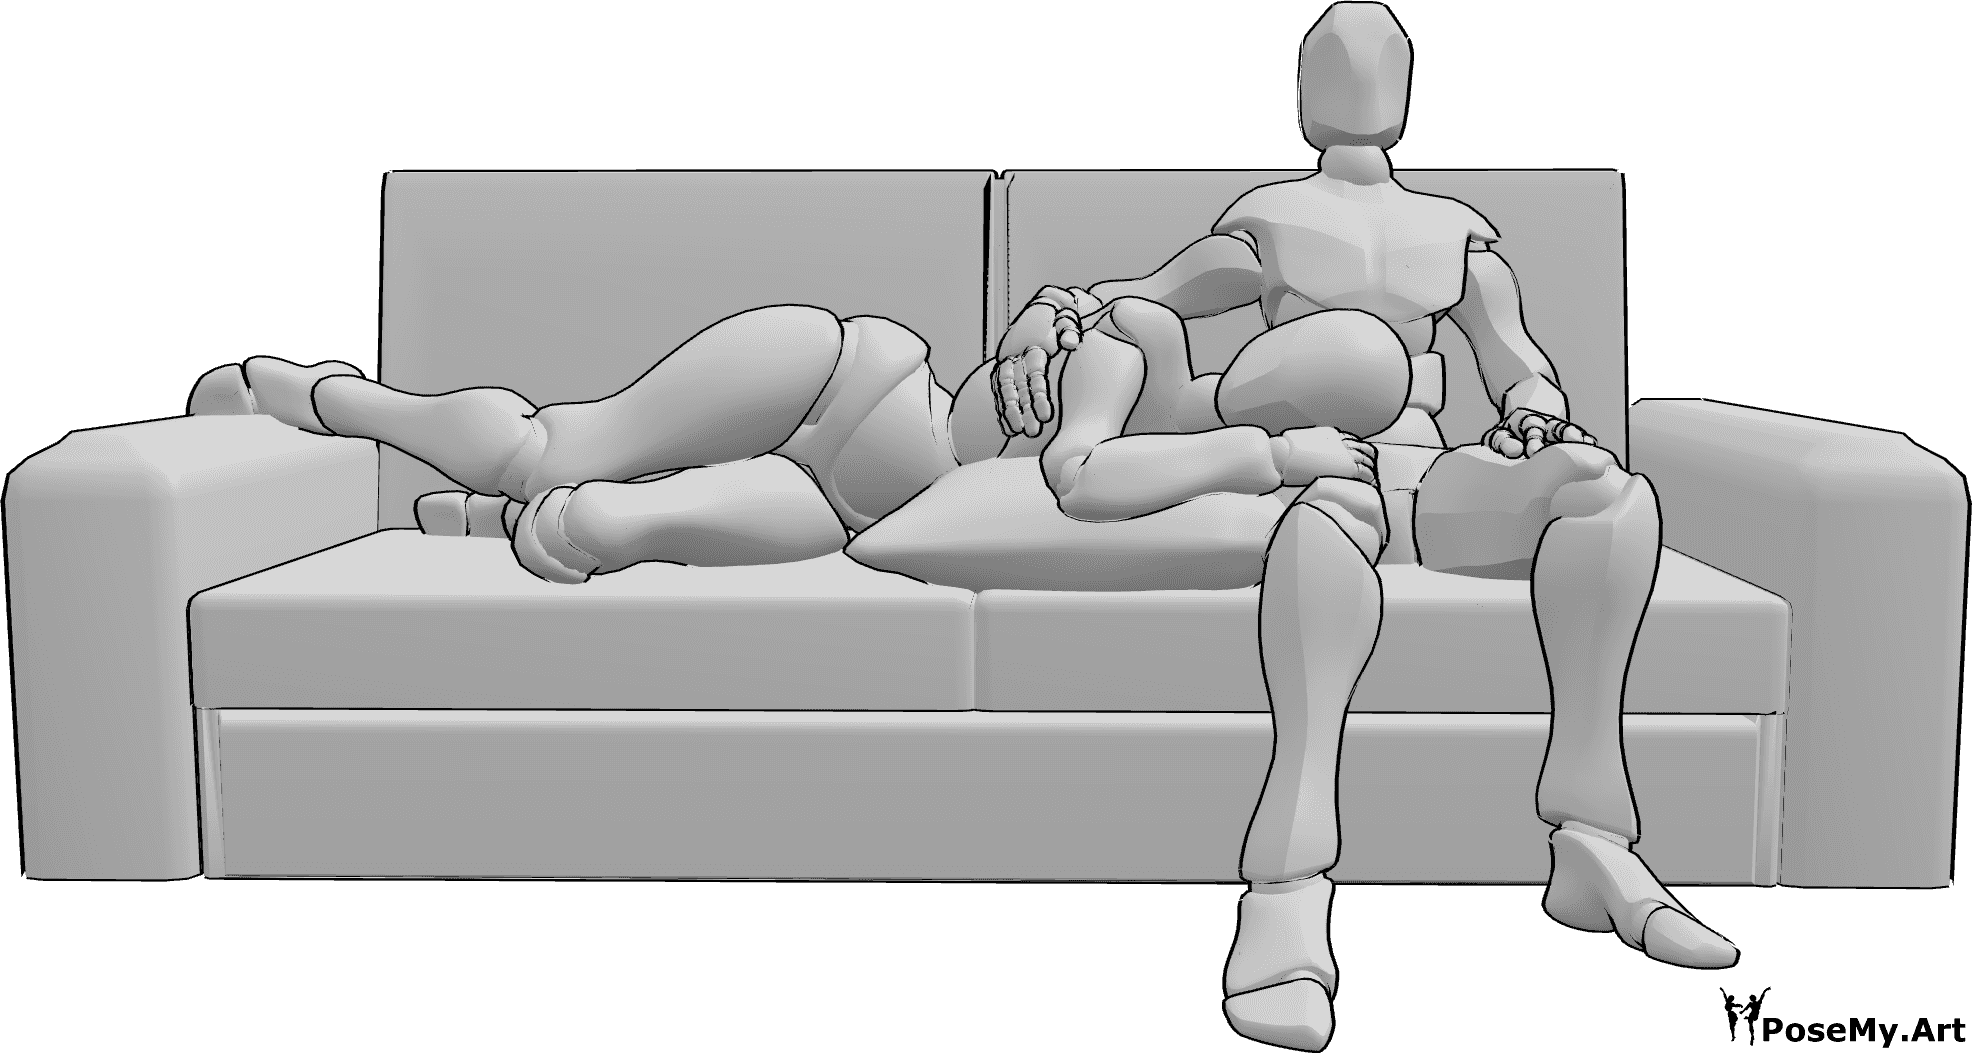 Pose Reference- Watching TV together pose - Female and male couple is watching TV together on the sofa, female is lying on the male